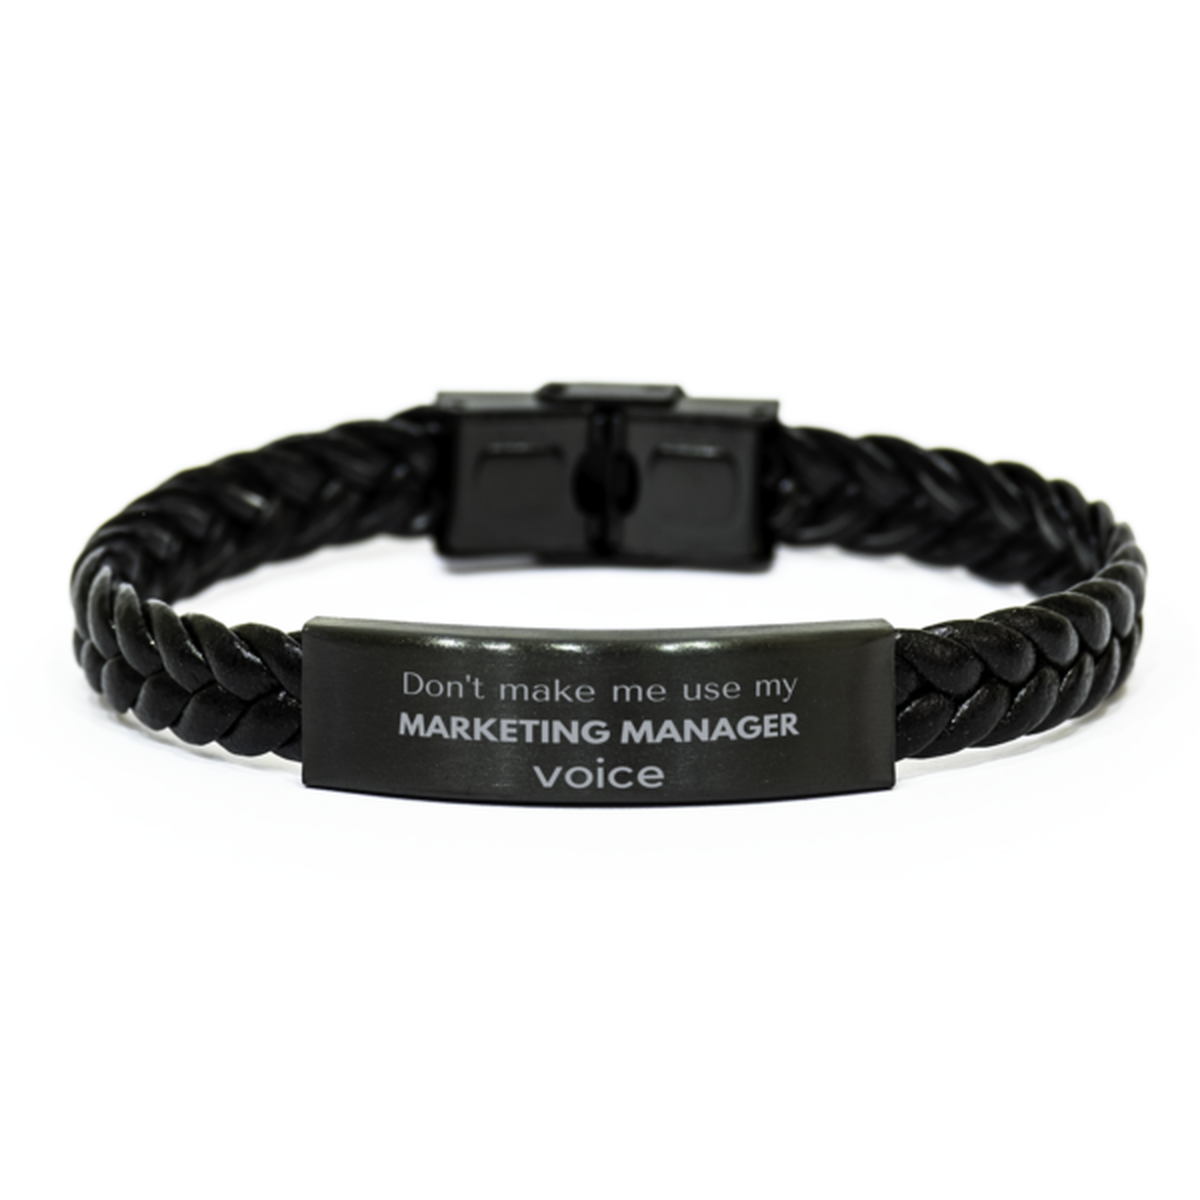 Don't make me use my Marketing Manager voice, Sarcasm Marketing Manager Gifts, Christmas Marketing Manager Braided Leather Bracelet Birthday Unique Gifts For Marketing Manager Coworkers, Men, Women, Colleague, Friends